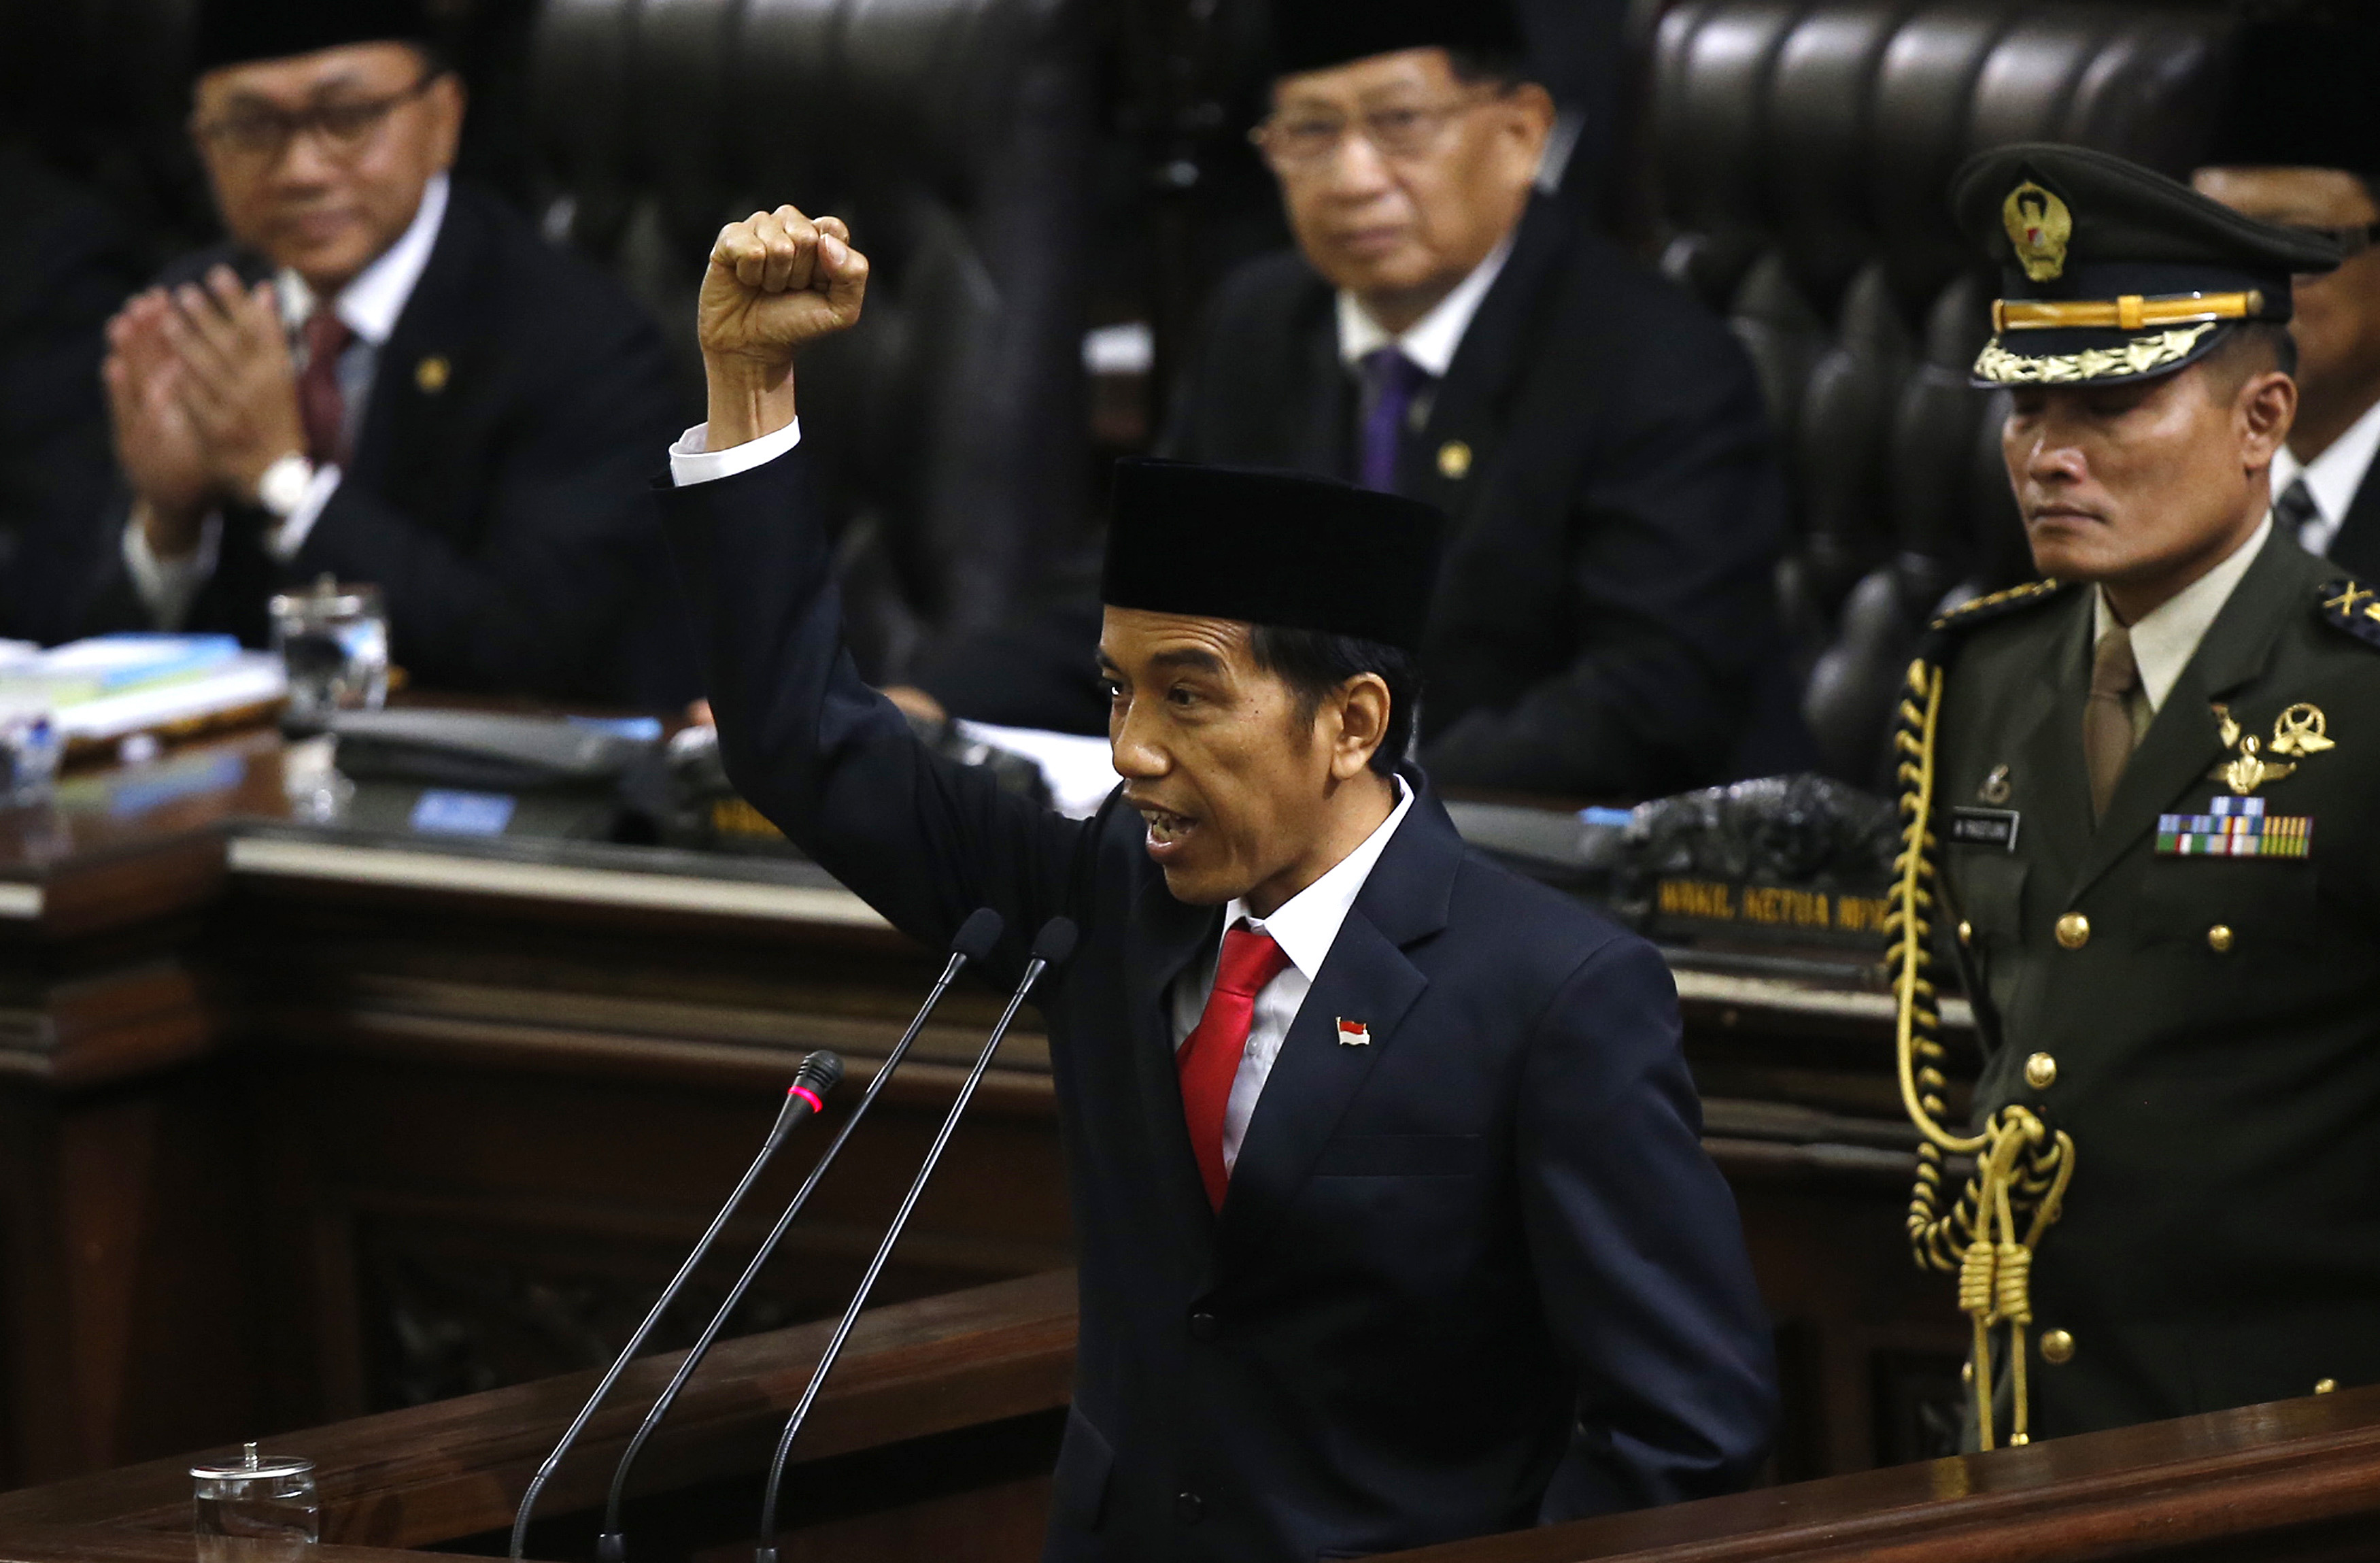 Indonesia's new President Widodo shouts "Merdeka" or Freedom at the end of his speech, during his inauguration in Jakarta